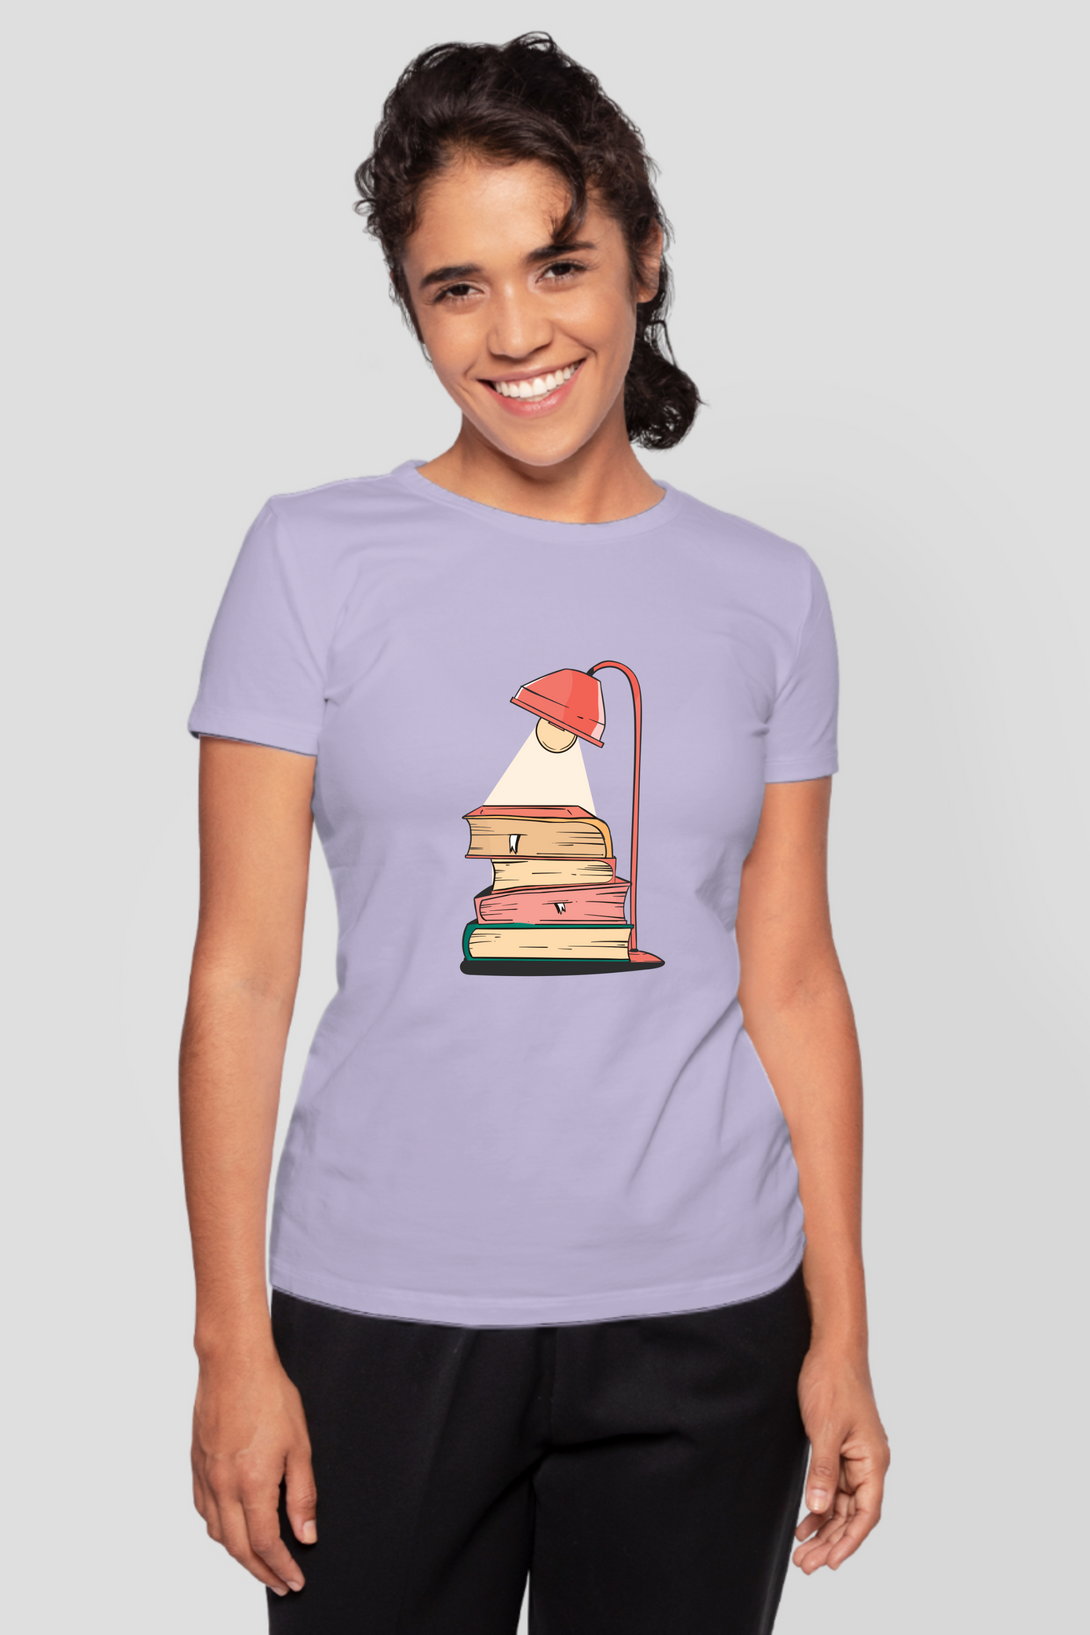 Lamp Of Knowledge Printed T-Shirt For Women - WowWaves - 11